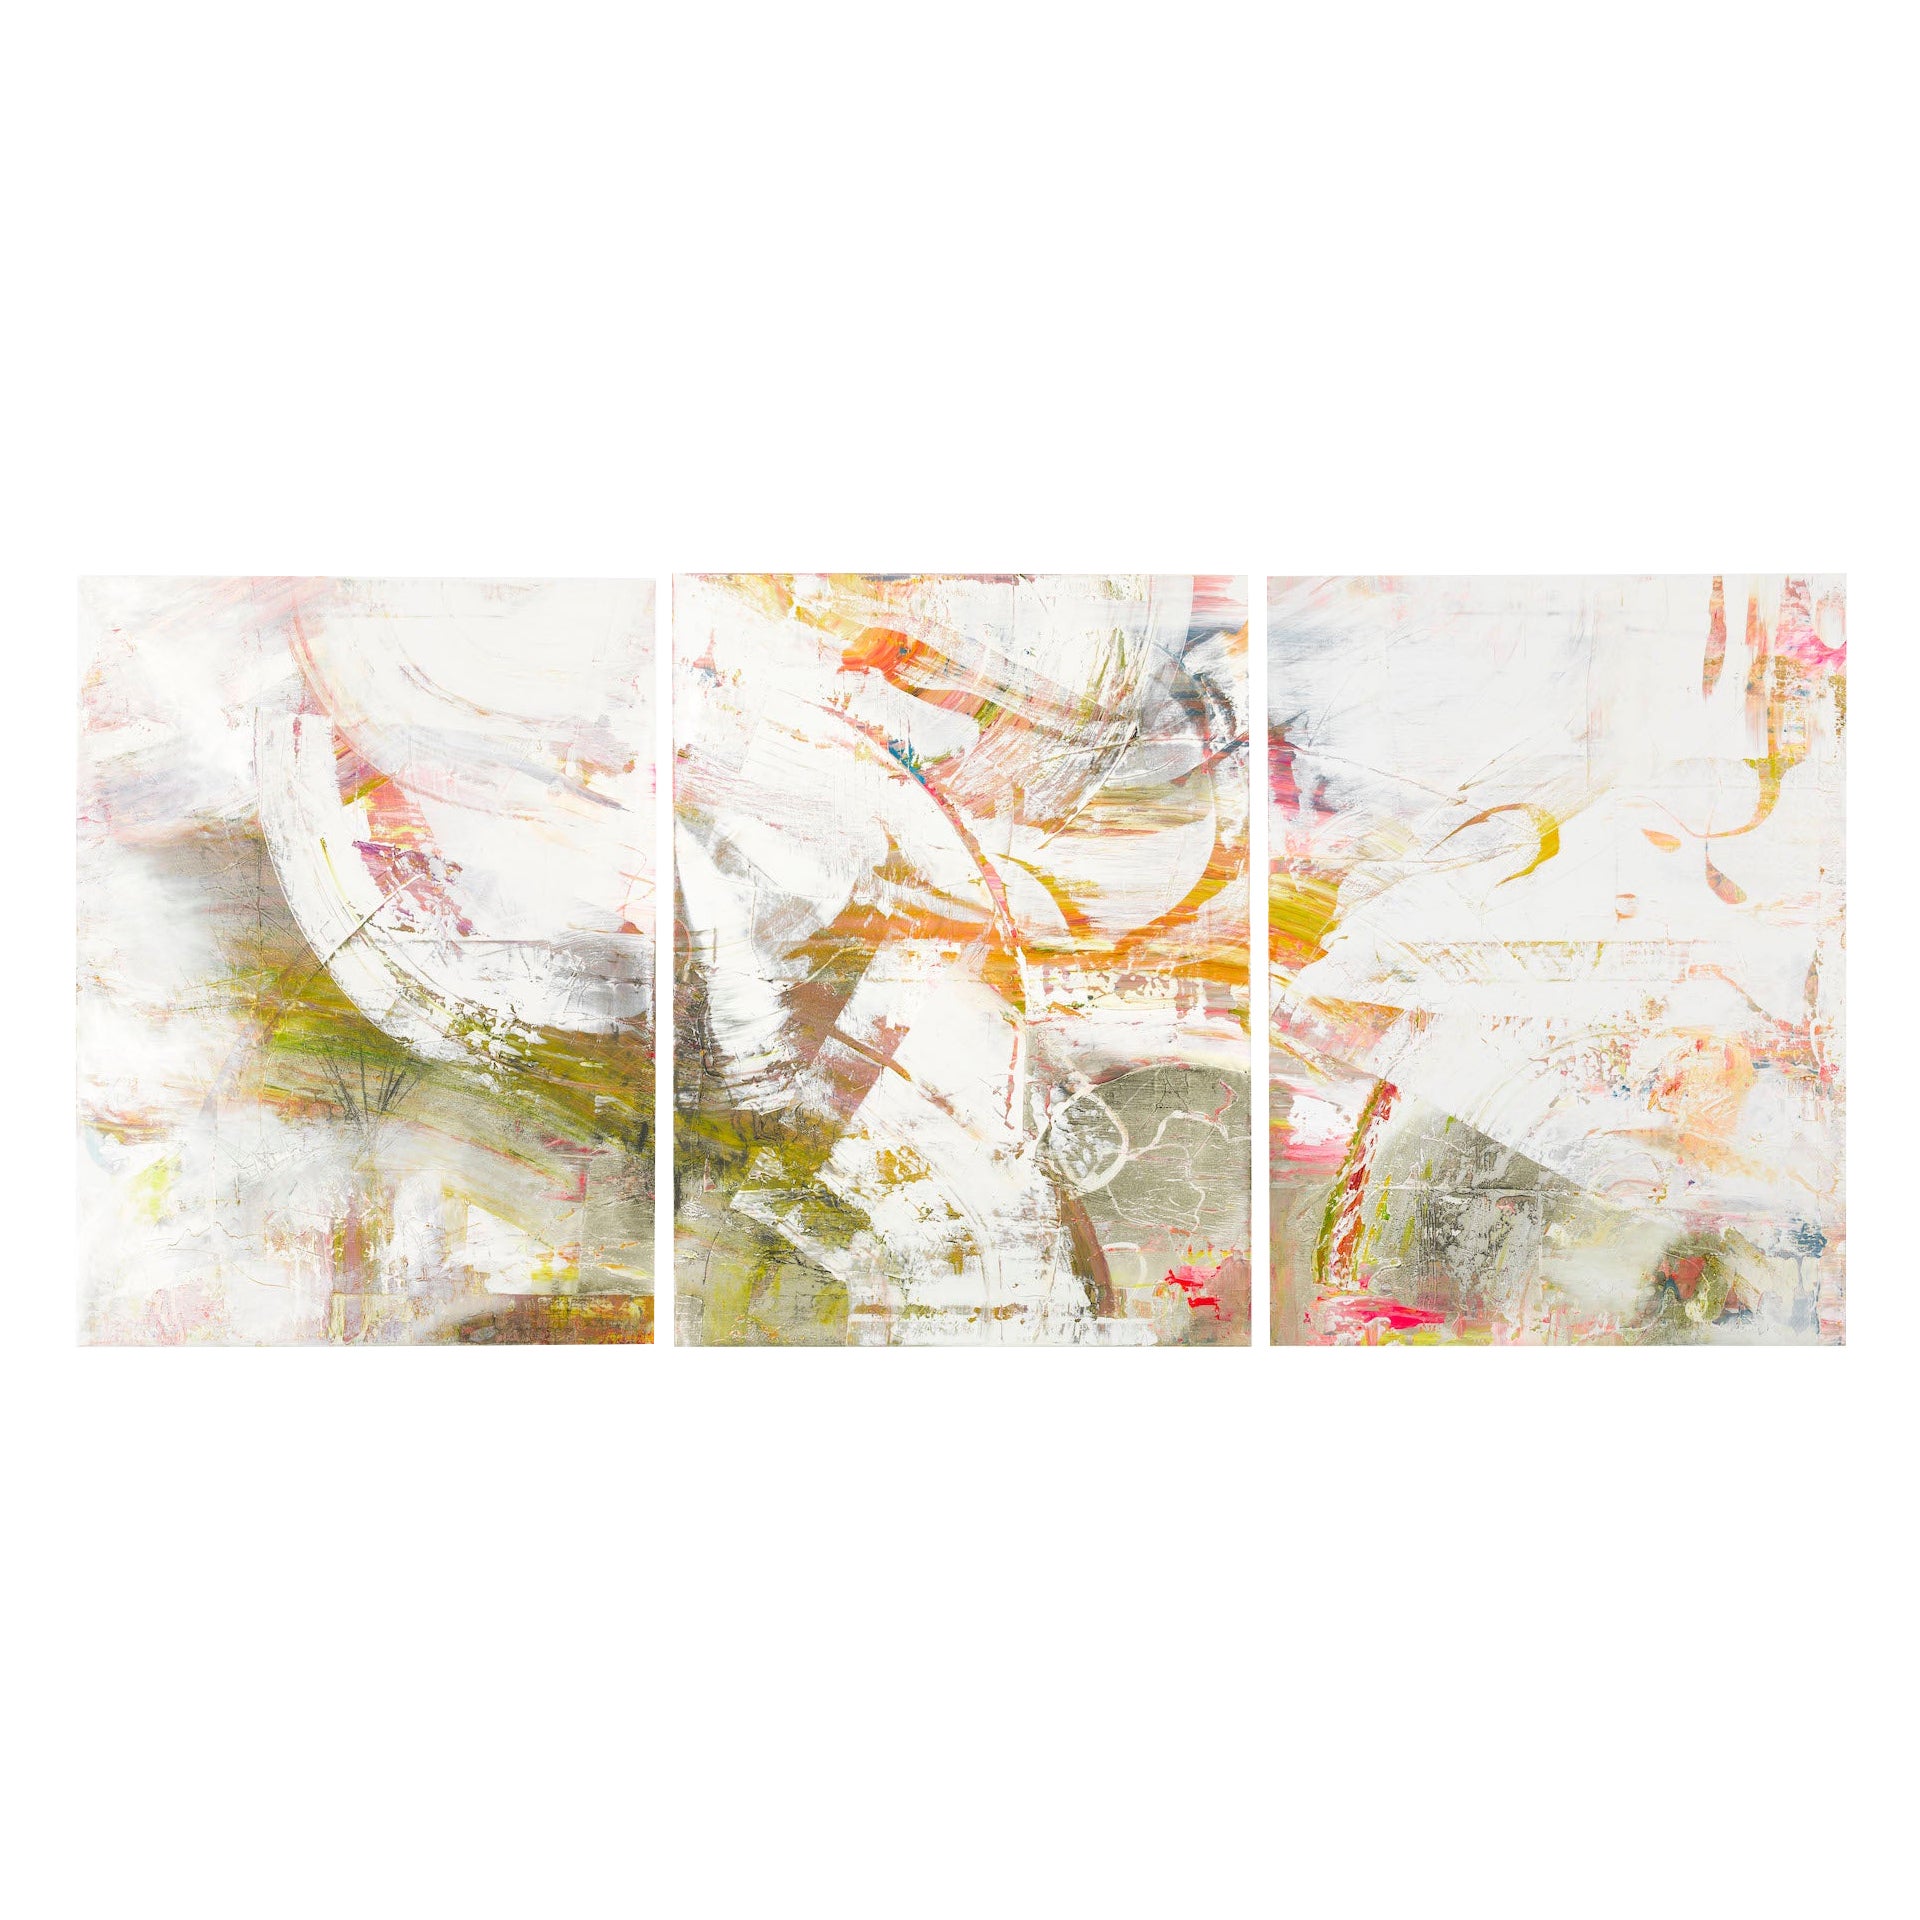 Huge contemporary impressionistic triptych with flashes of color on milky ground For Sale